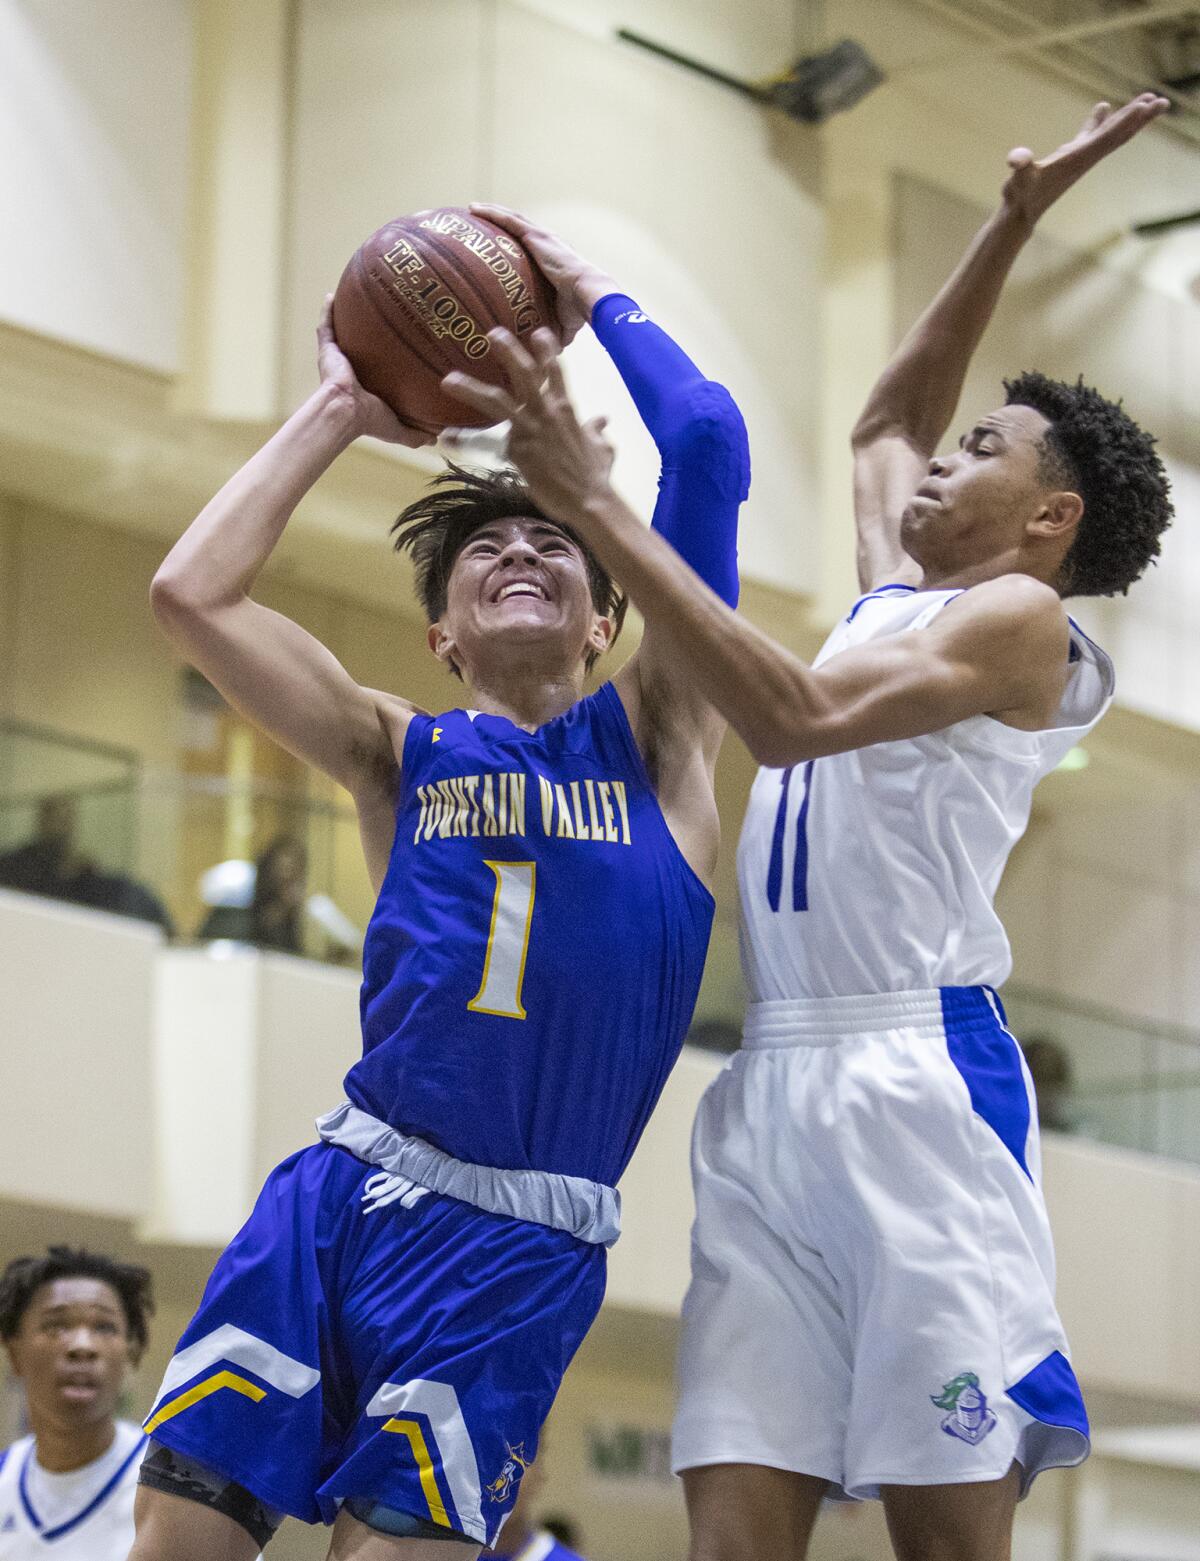 Fountain Valley's Aden Casarez goes up for a shot against Price's Christian Williams during the quarterfinals of the CIF State Southern California Regional Division III playoffs on Thursday.